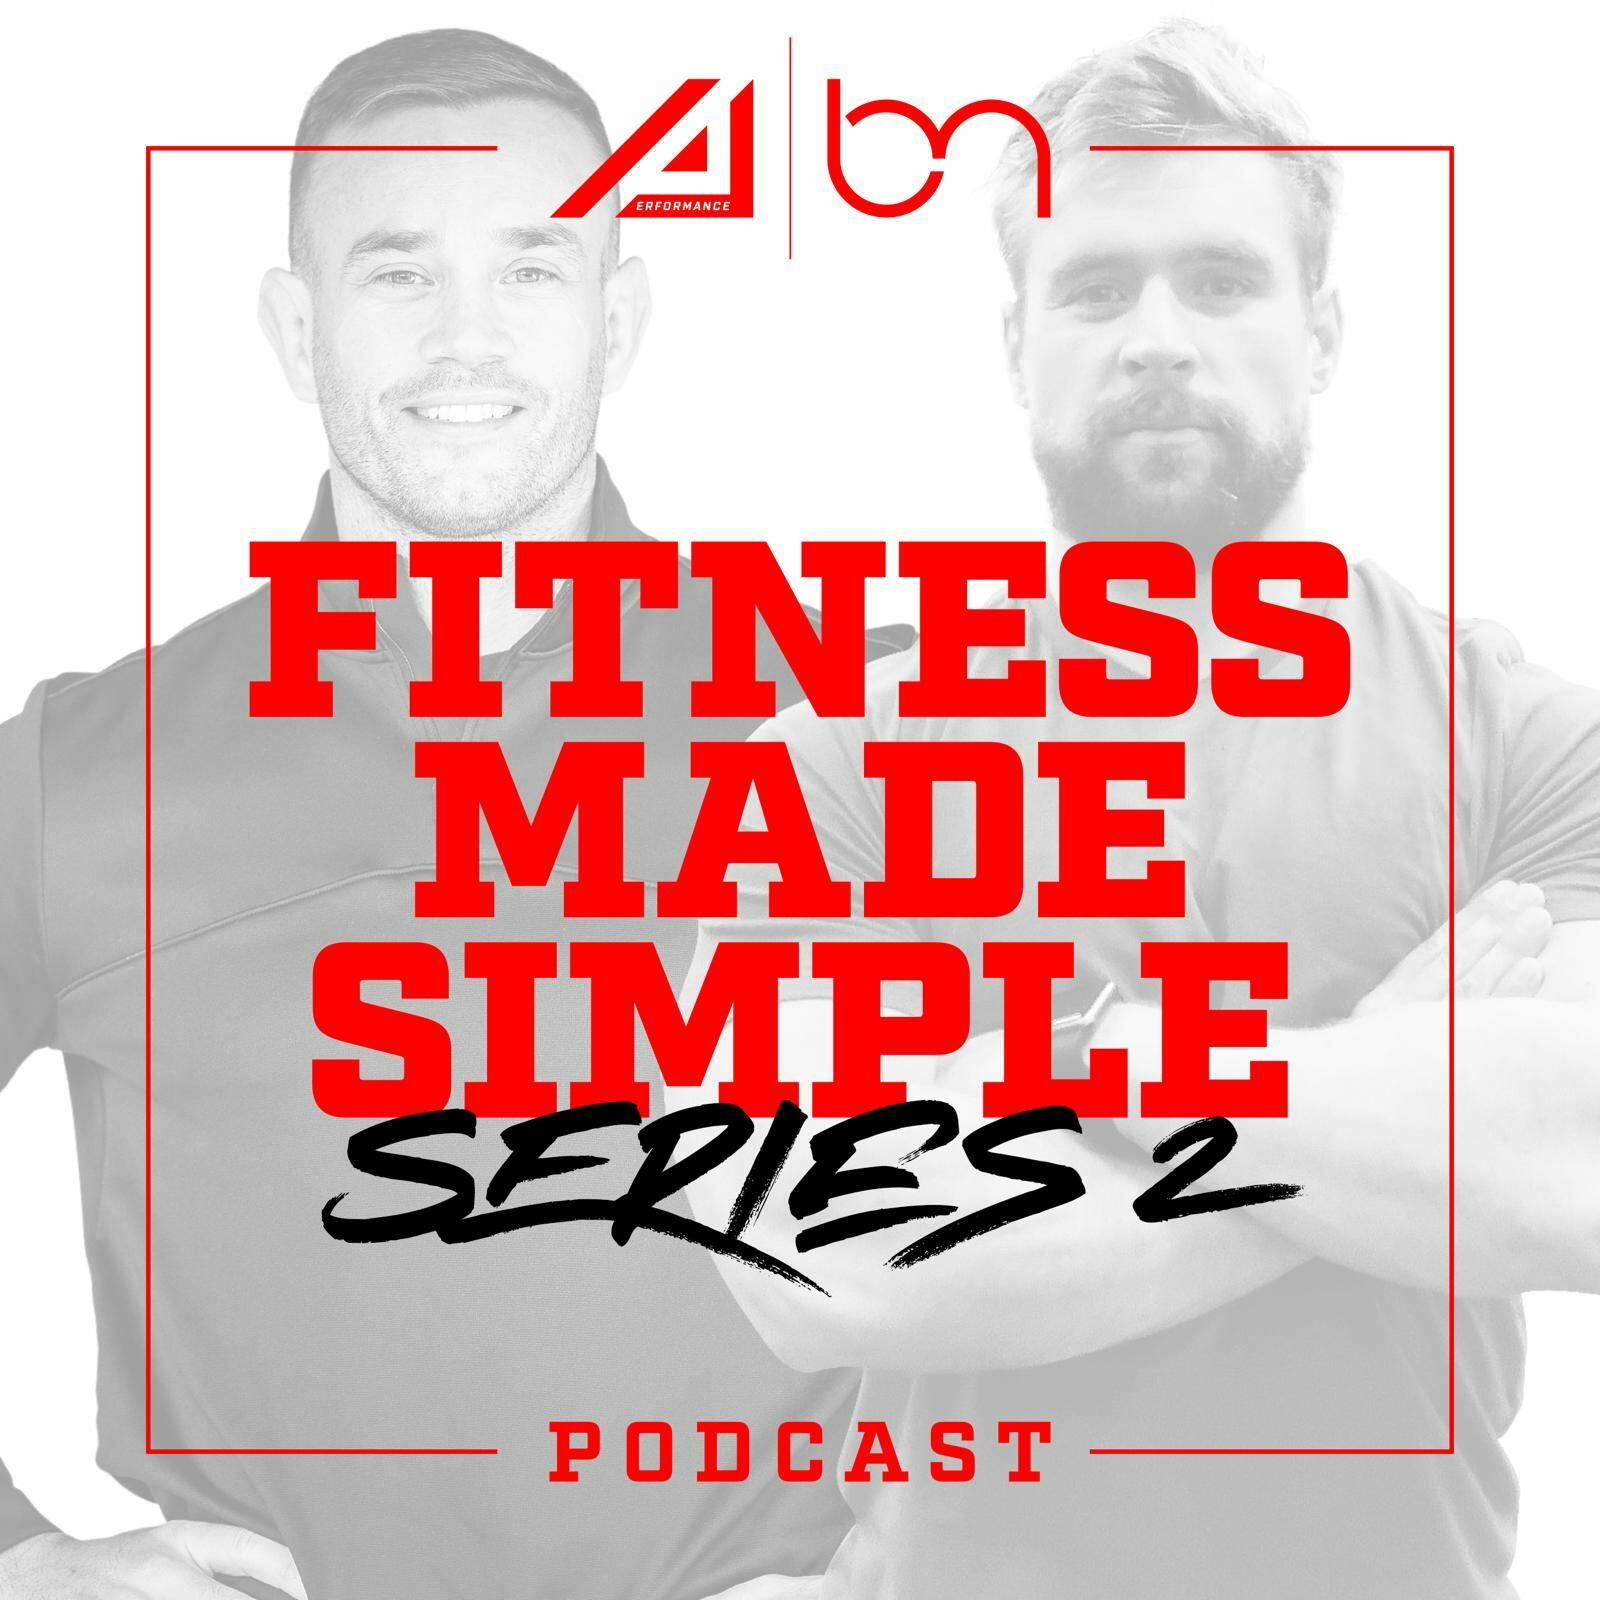 #50 Fitness Made Simple Season 1 Finale Q & A - Fitness Made Simple iHe...